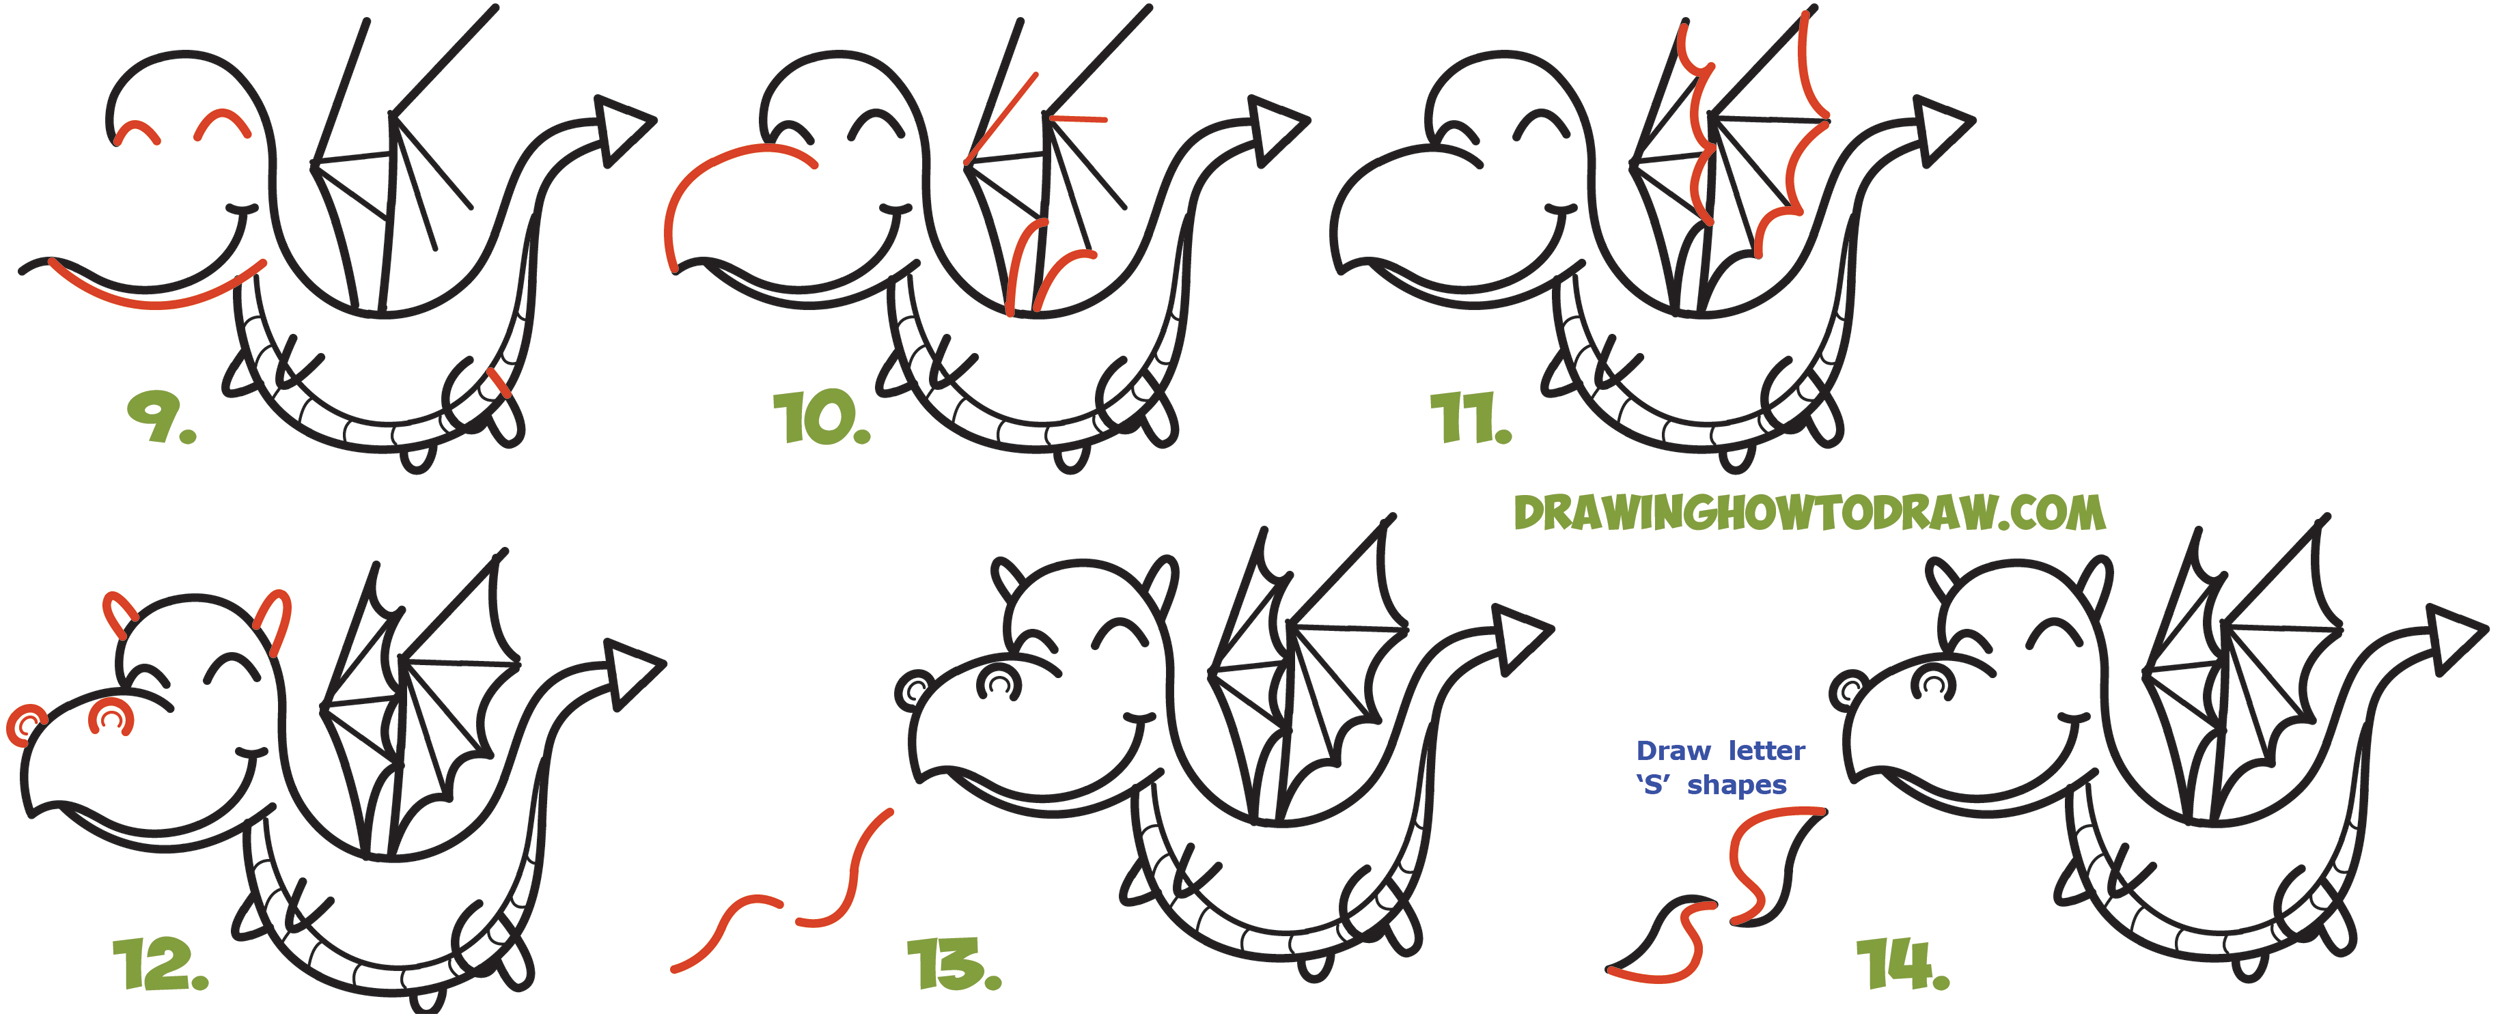 How to Draw a Cute Kawaii / Chibi Dragon Shooting Fire with Easy Step